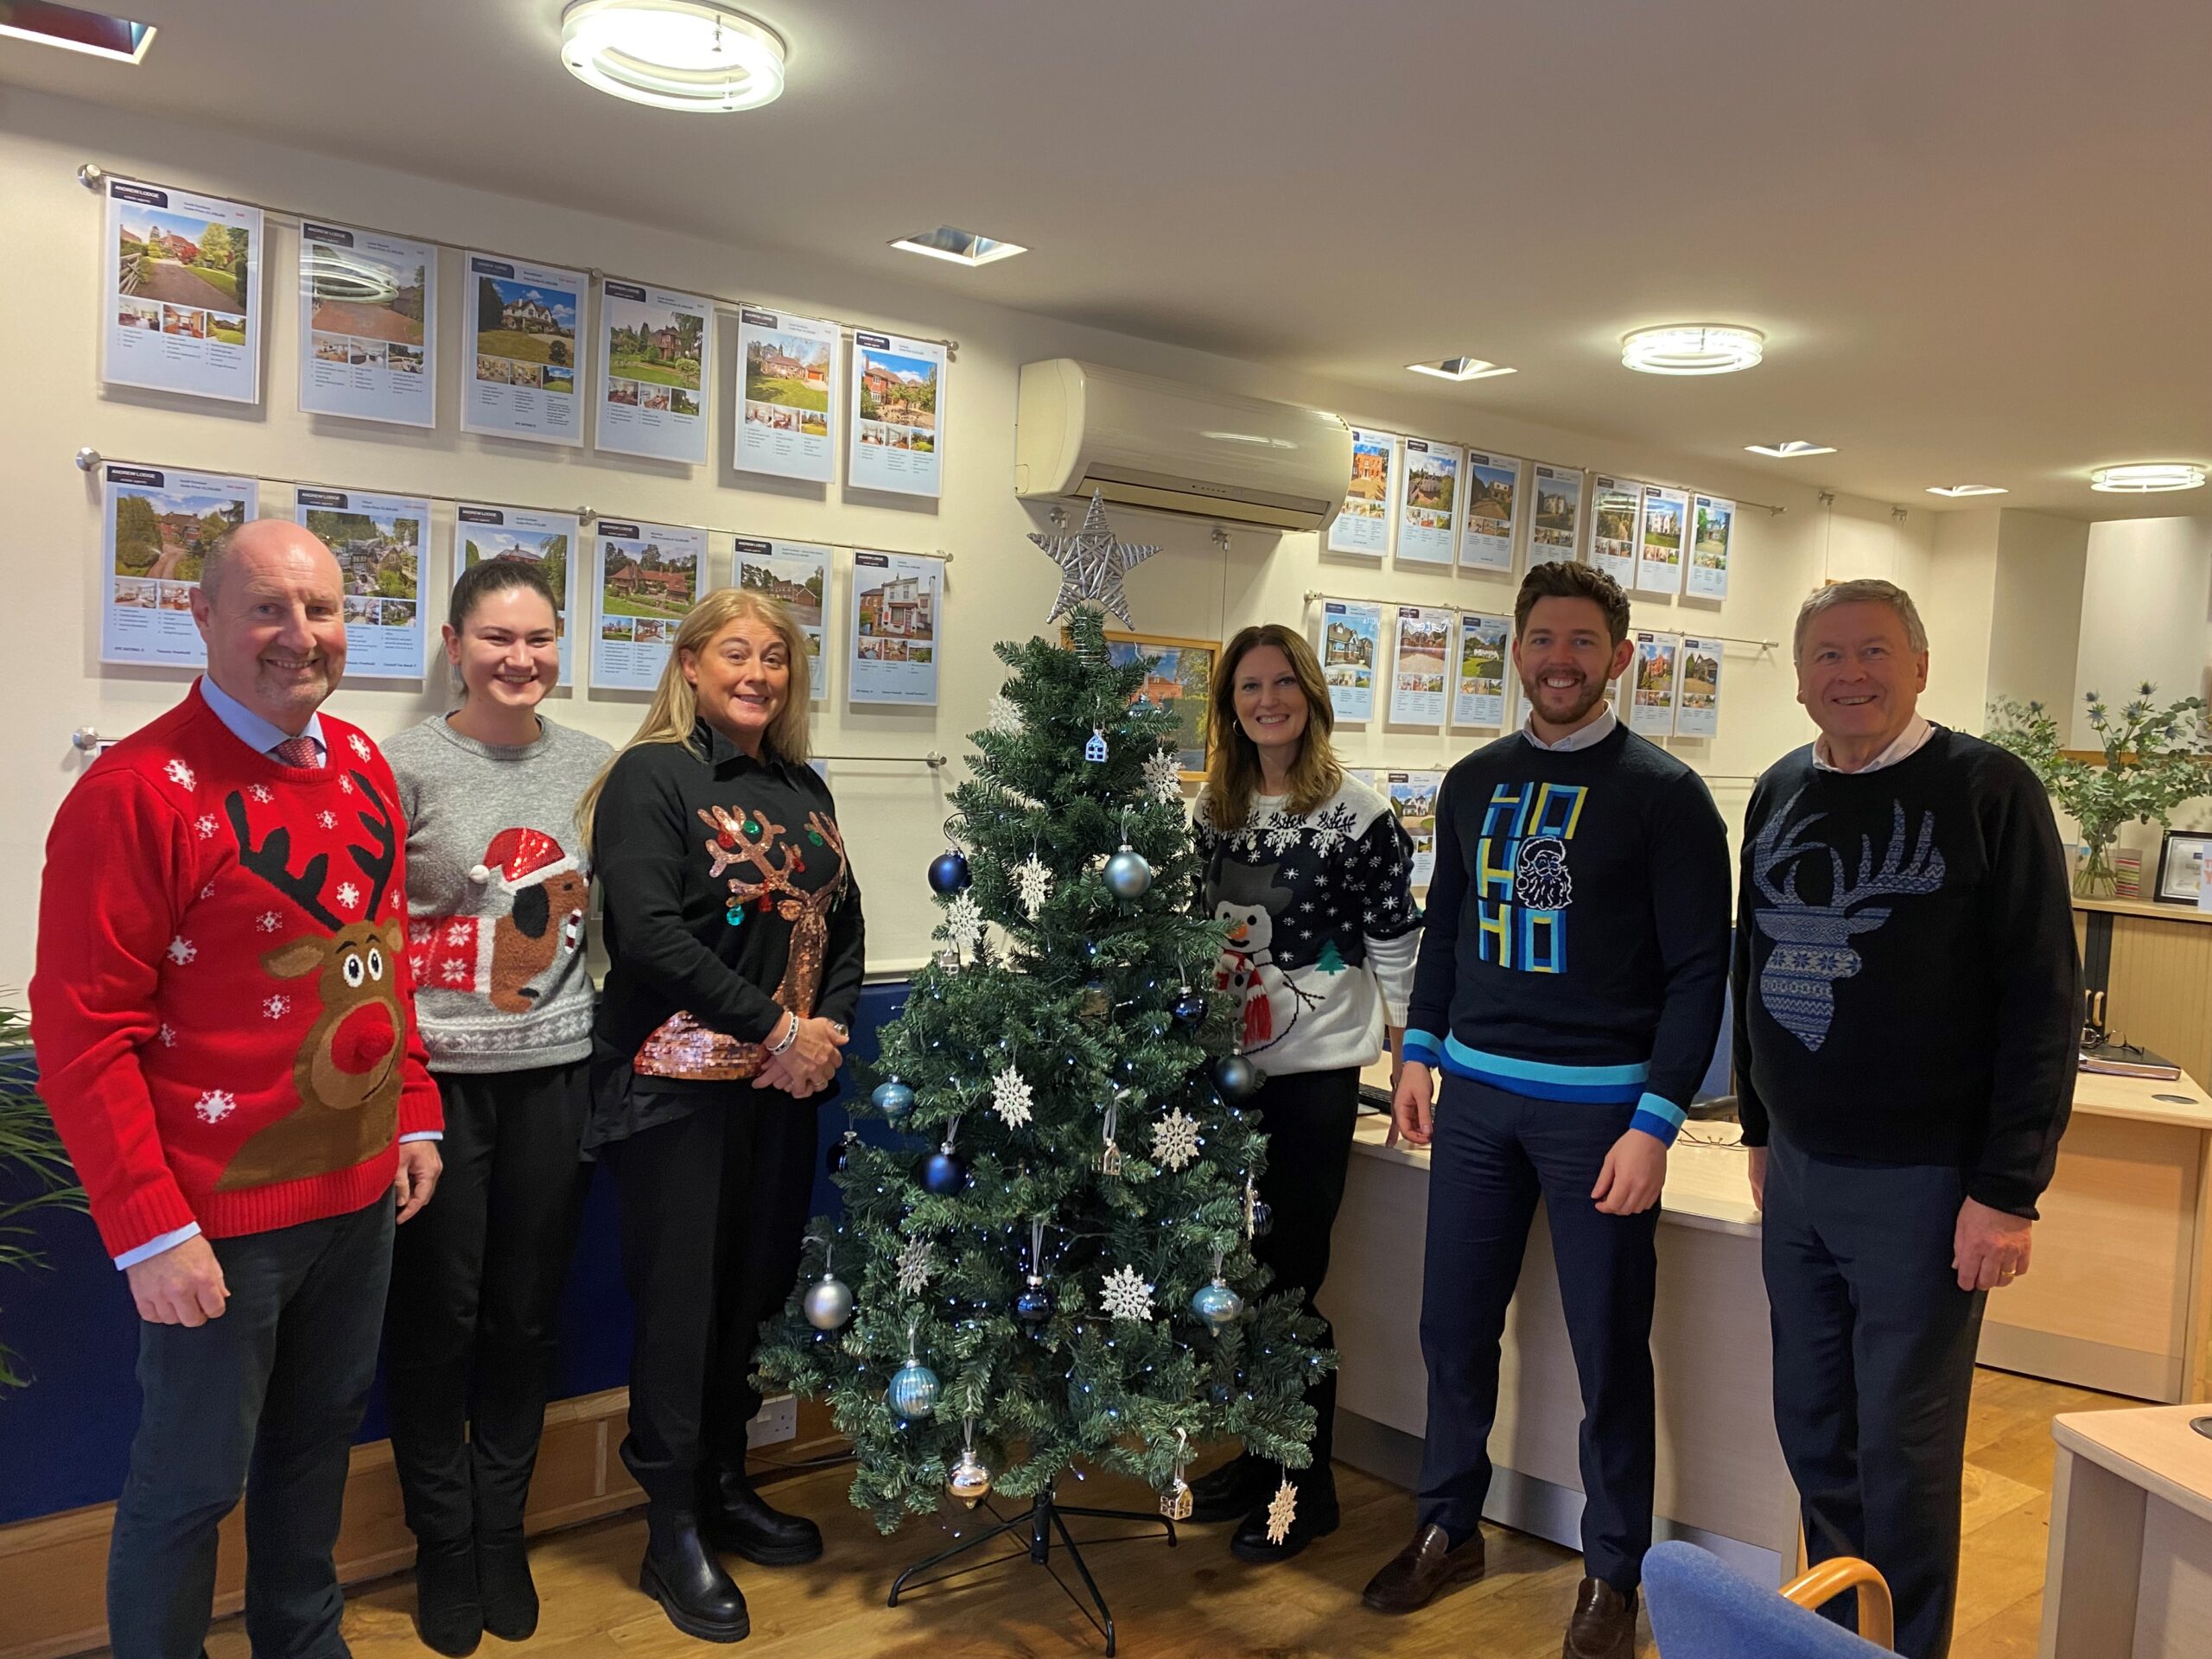 Christmas Jumper Day Raises Funds To Support Local Hospice